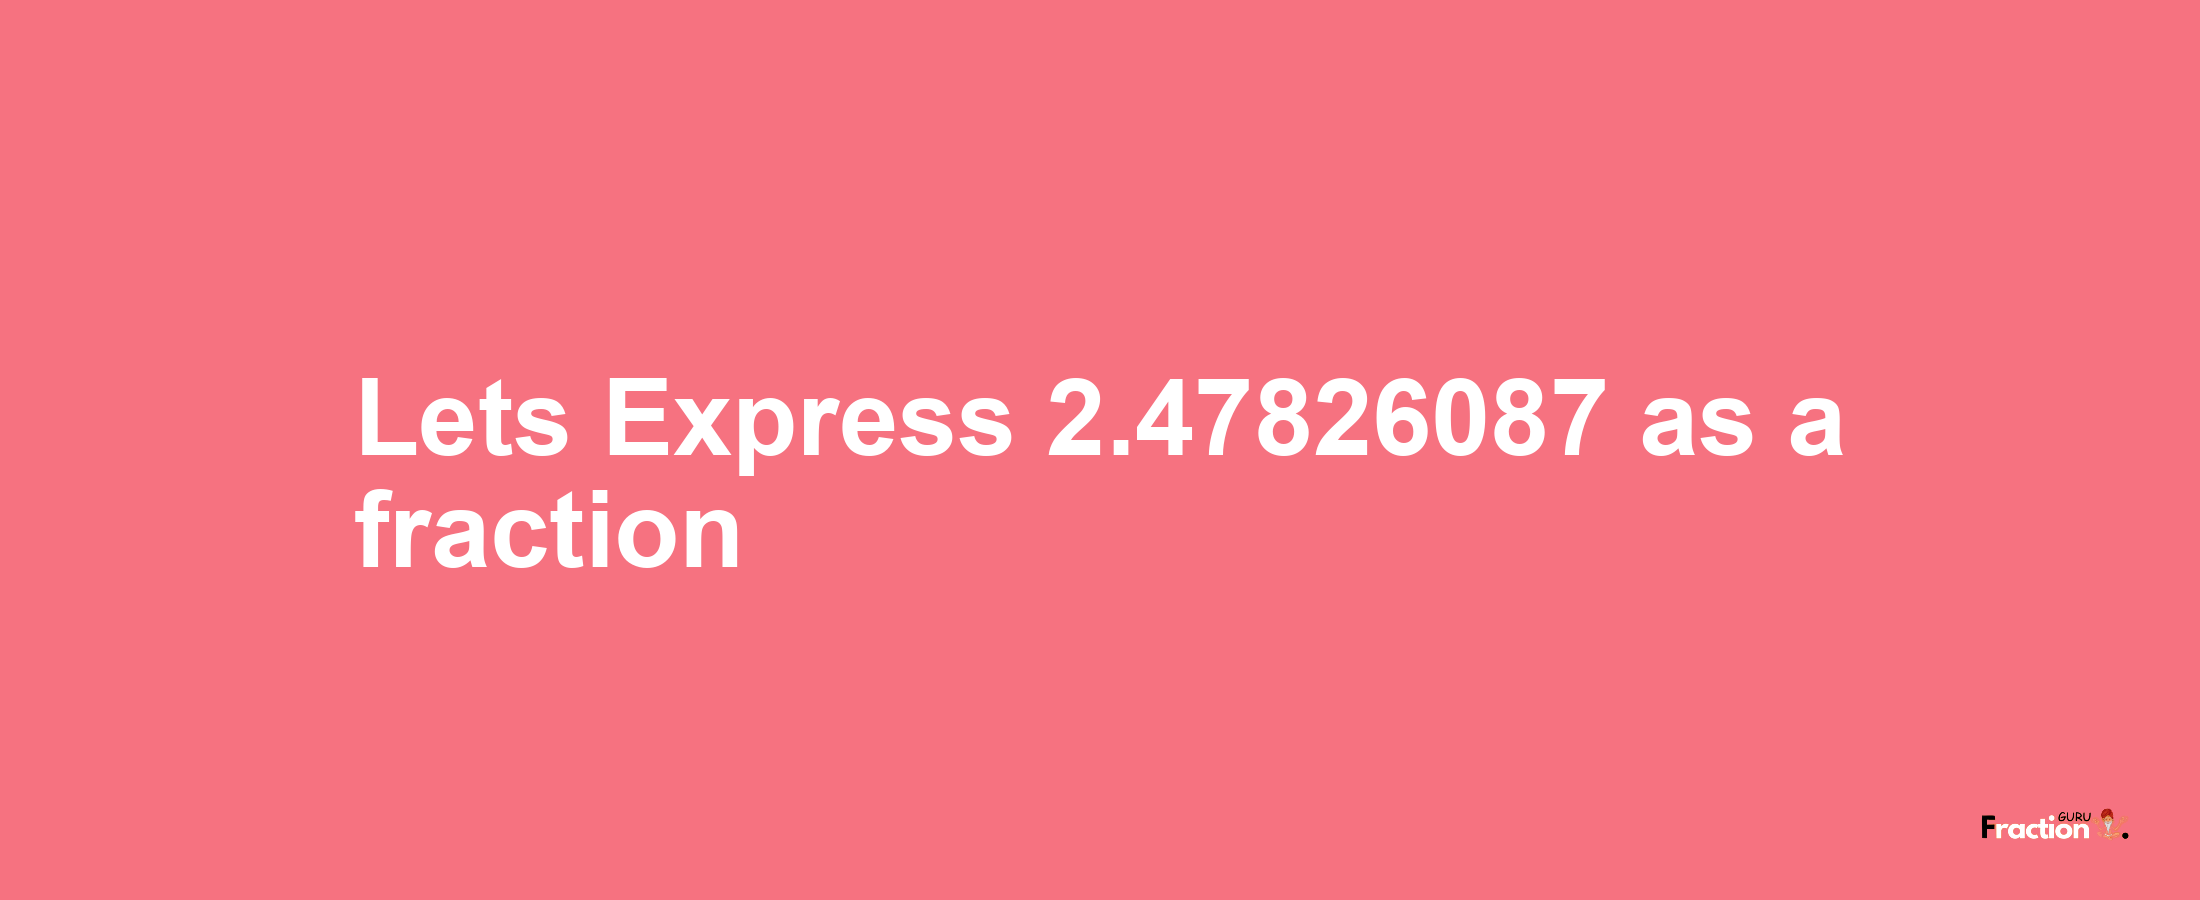 Lets Express 2.47826087 as afraction